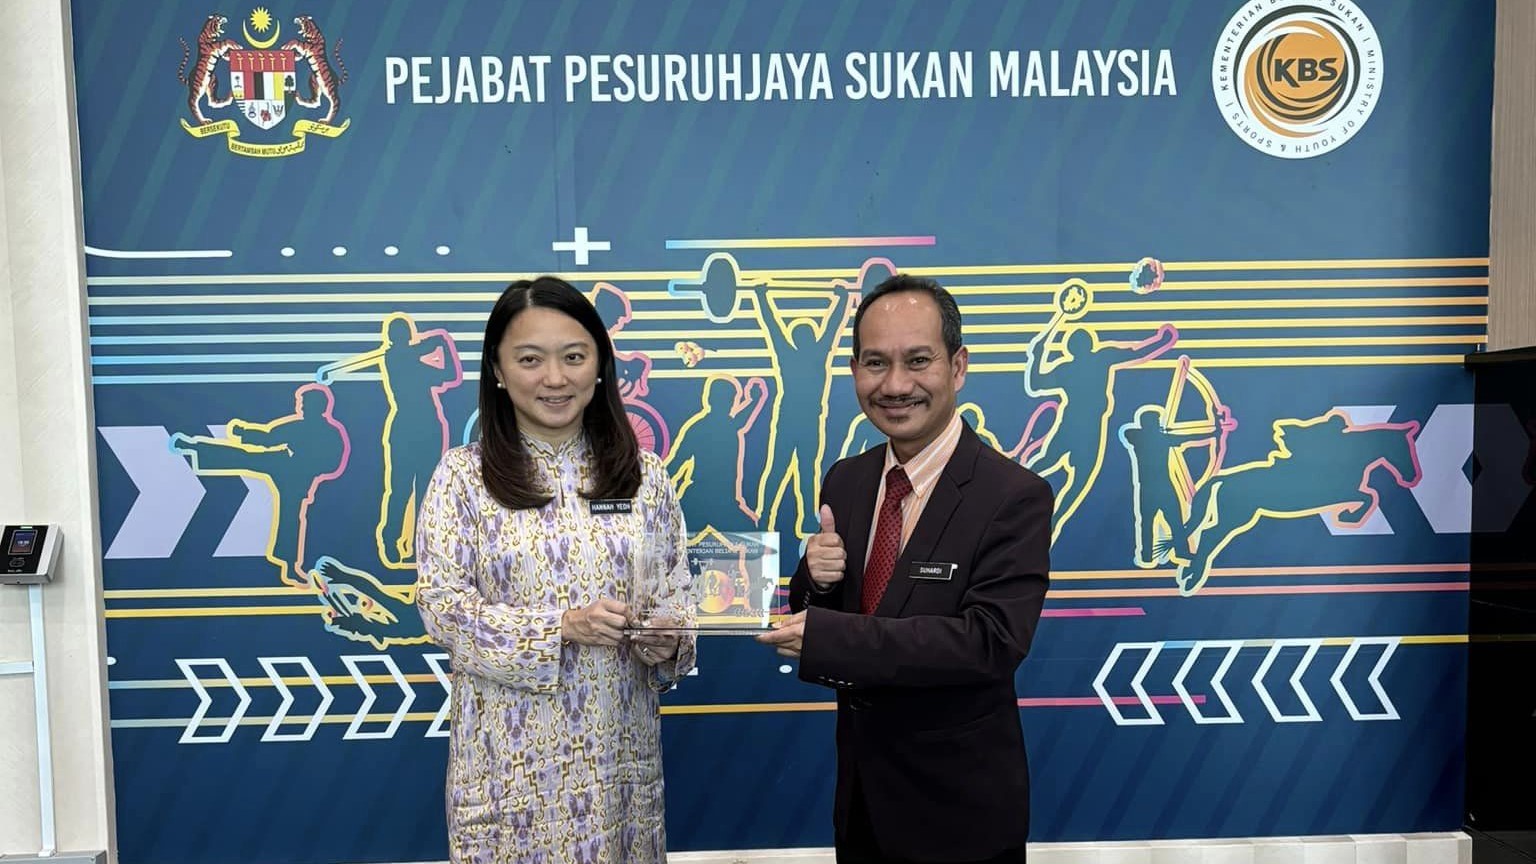 Suhardi urges sports associations' commercial overhaul for sponsorship boost